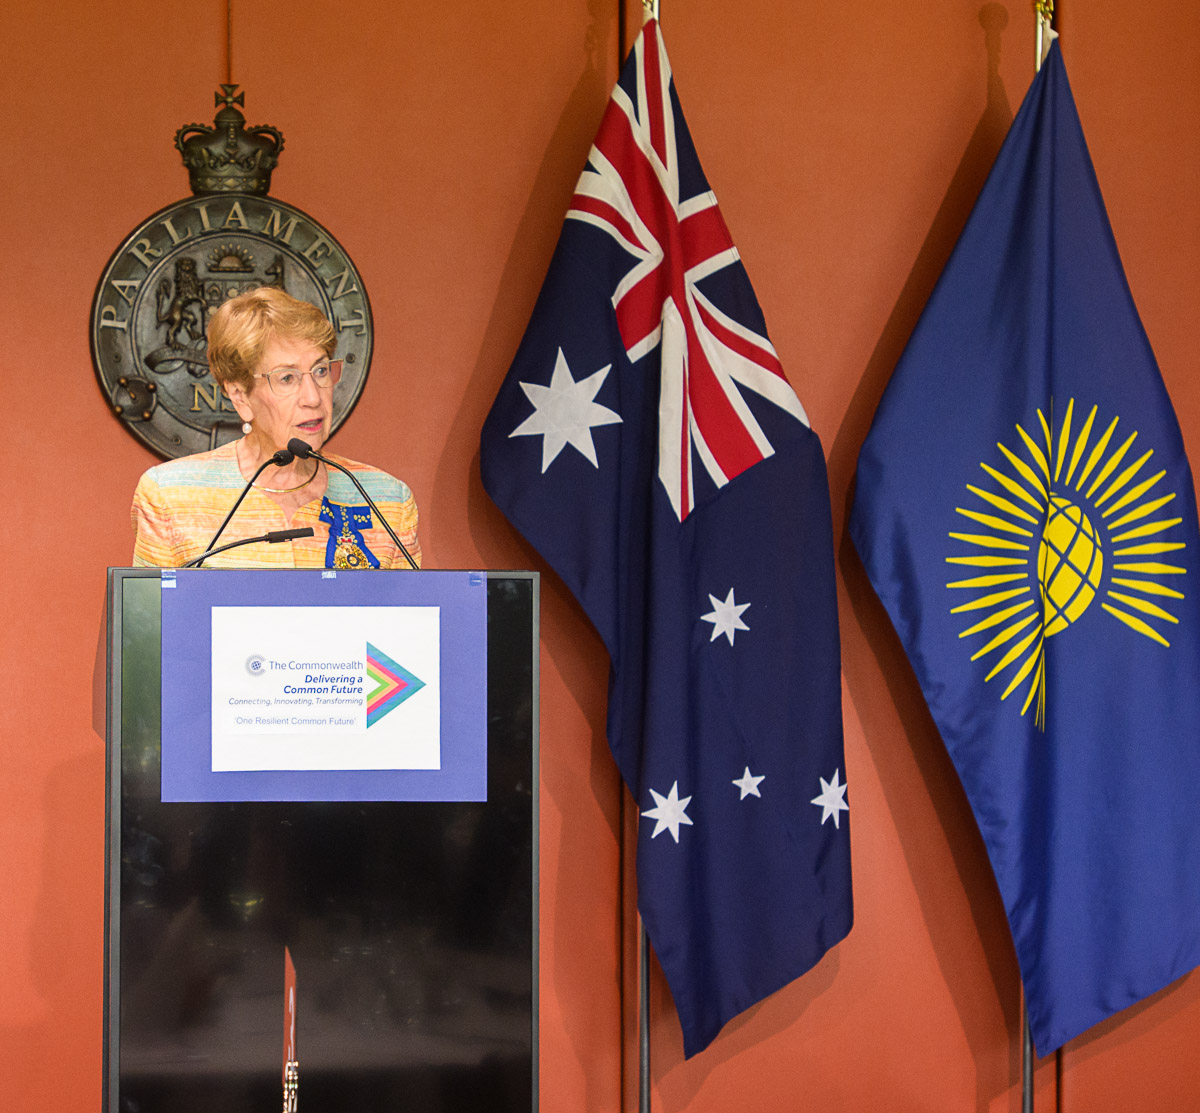 Her Excellency with Commonwealth of Nations flag